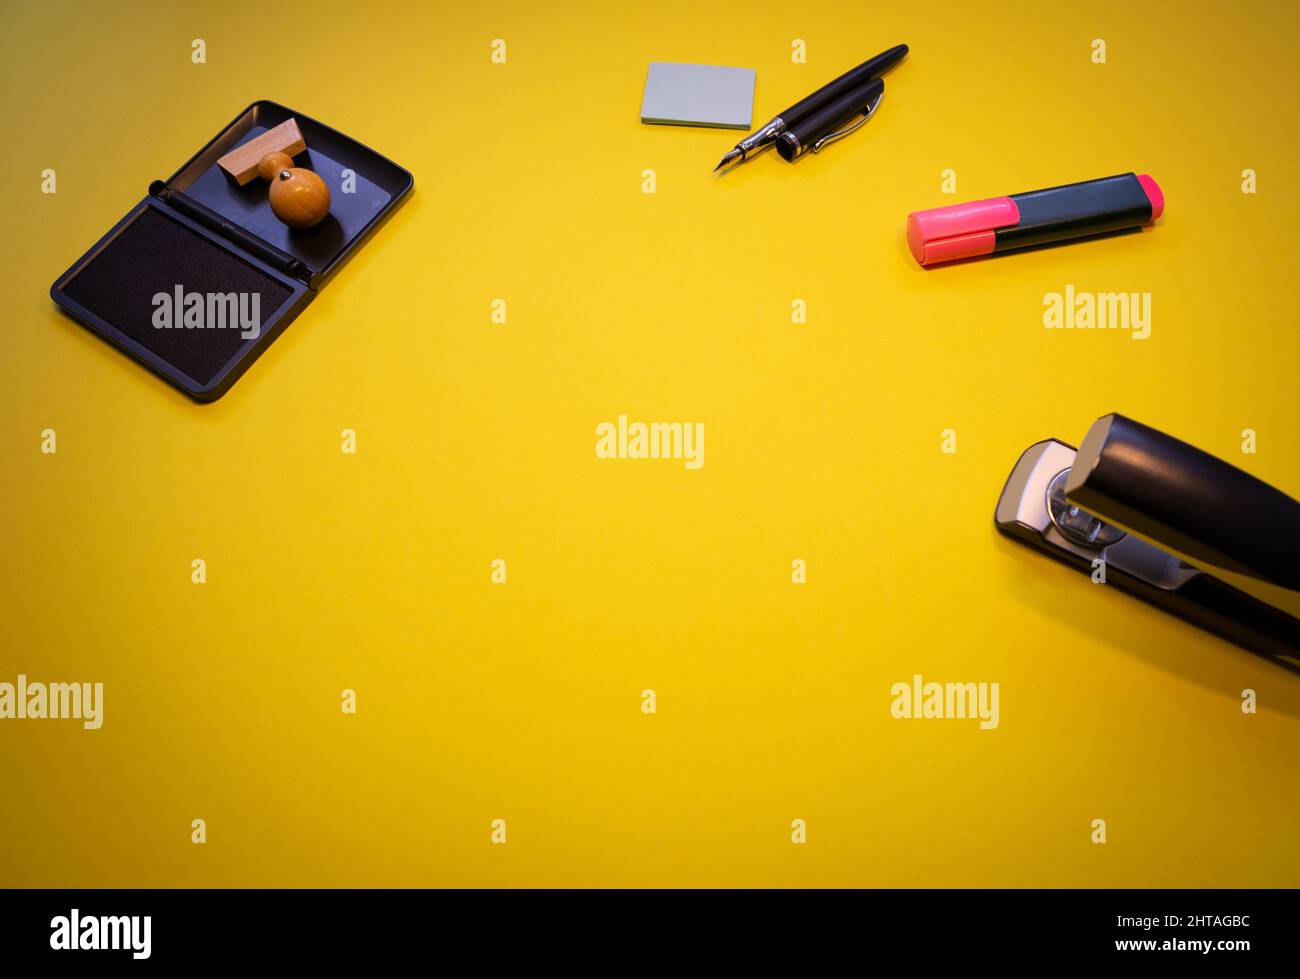 A top view of a wooden stamp with ink, metal stapler, sticky notes and markers isolated on a yellow background Stock Photo